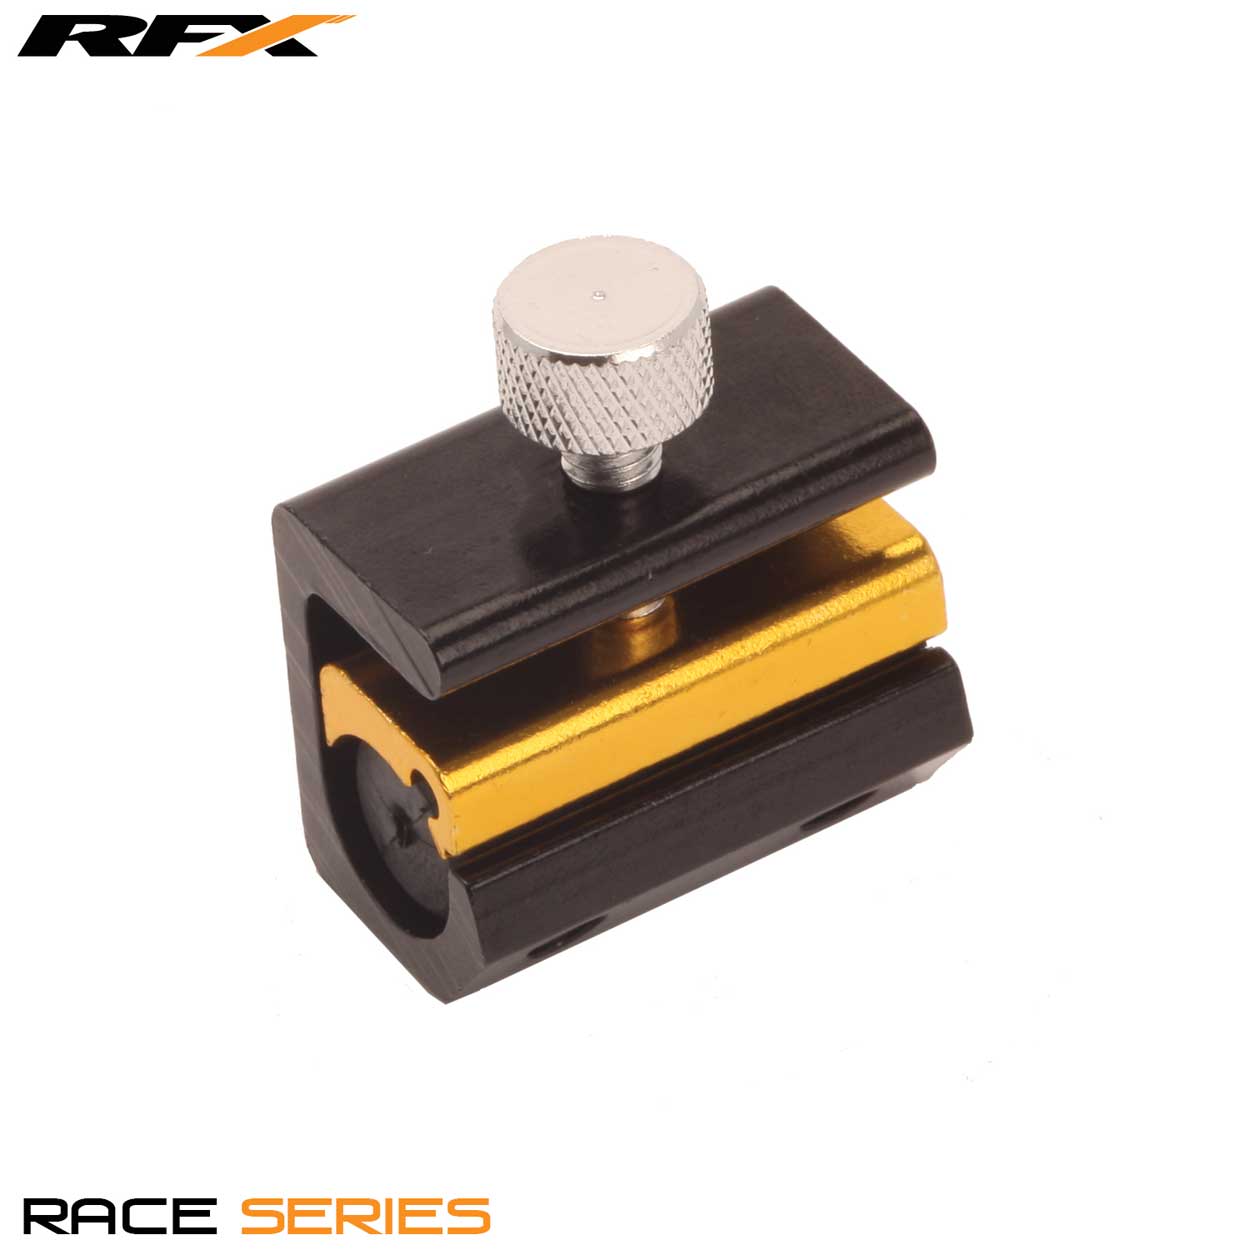 RFX Race Cable Oiler Black Universal to suit all Cables